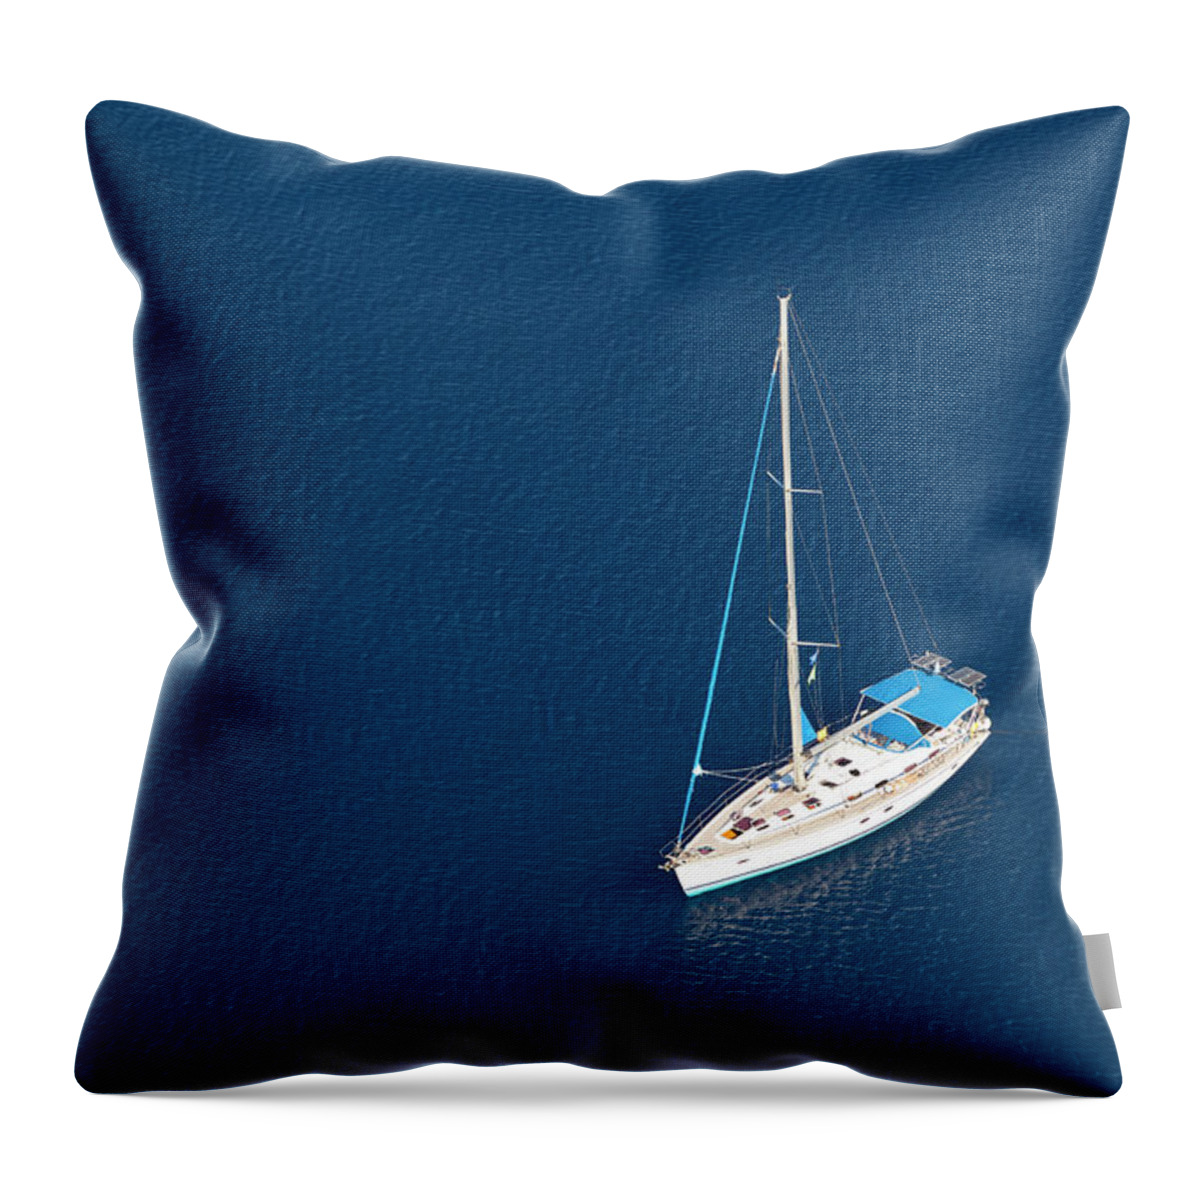 Greek Culture Throw Pillow featuring the photograph Sailboat In Blue Water by Michaelutech